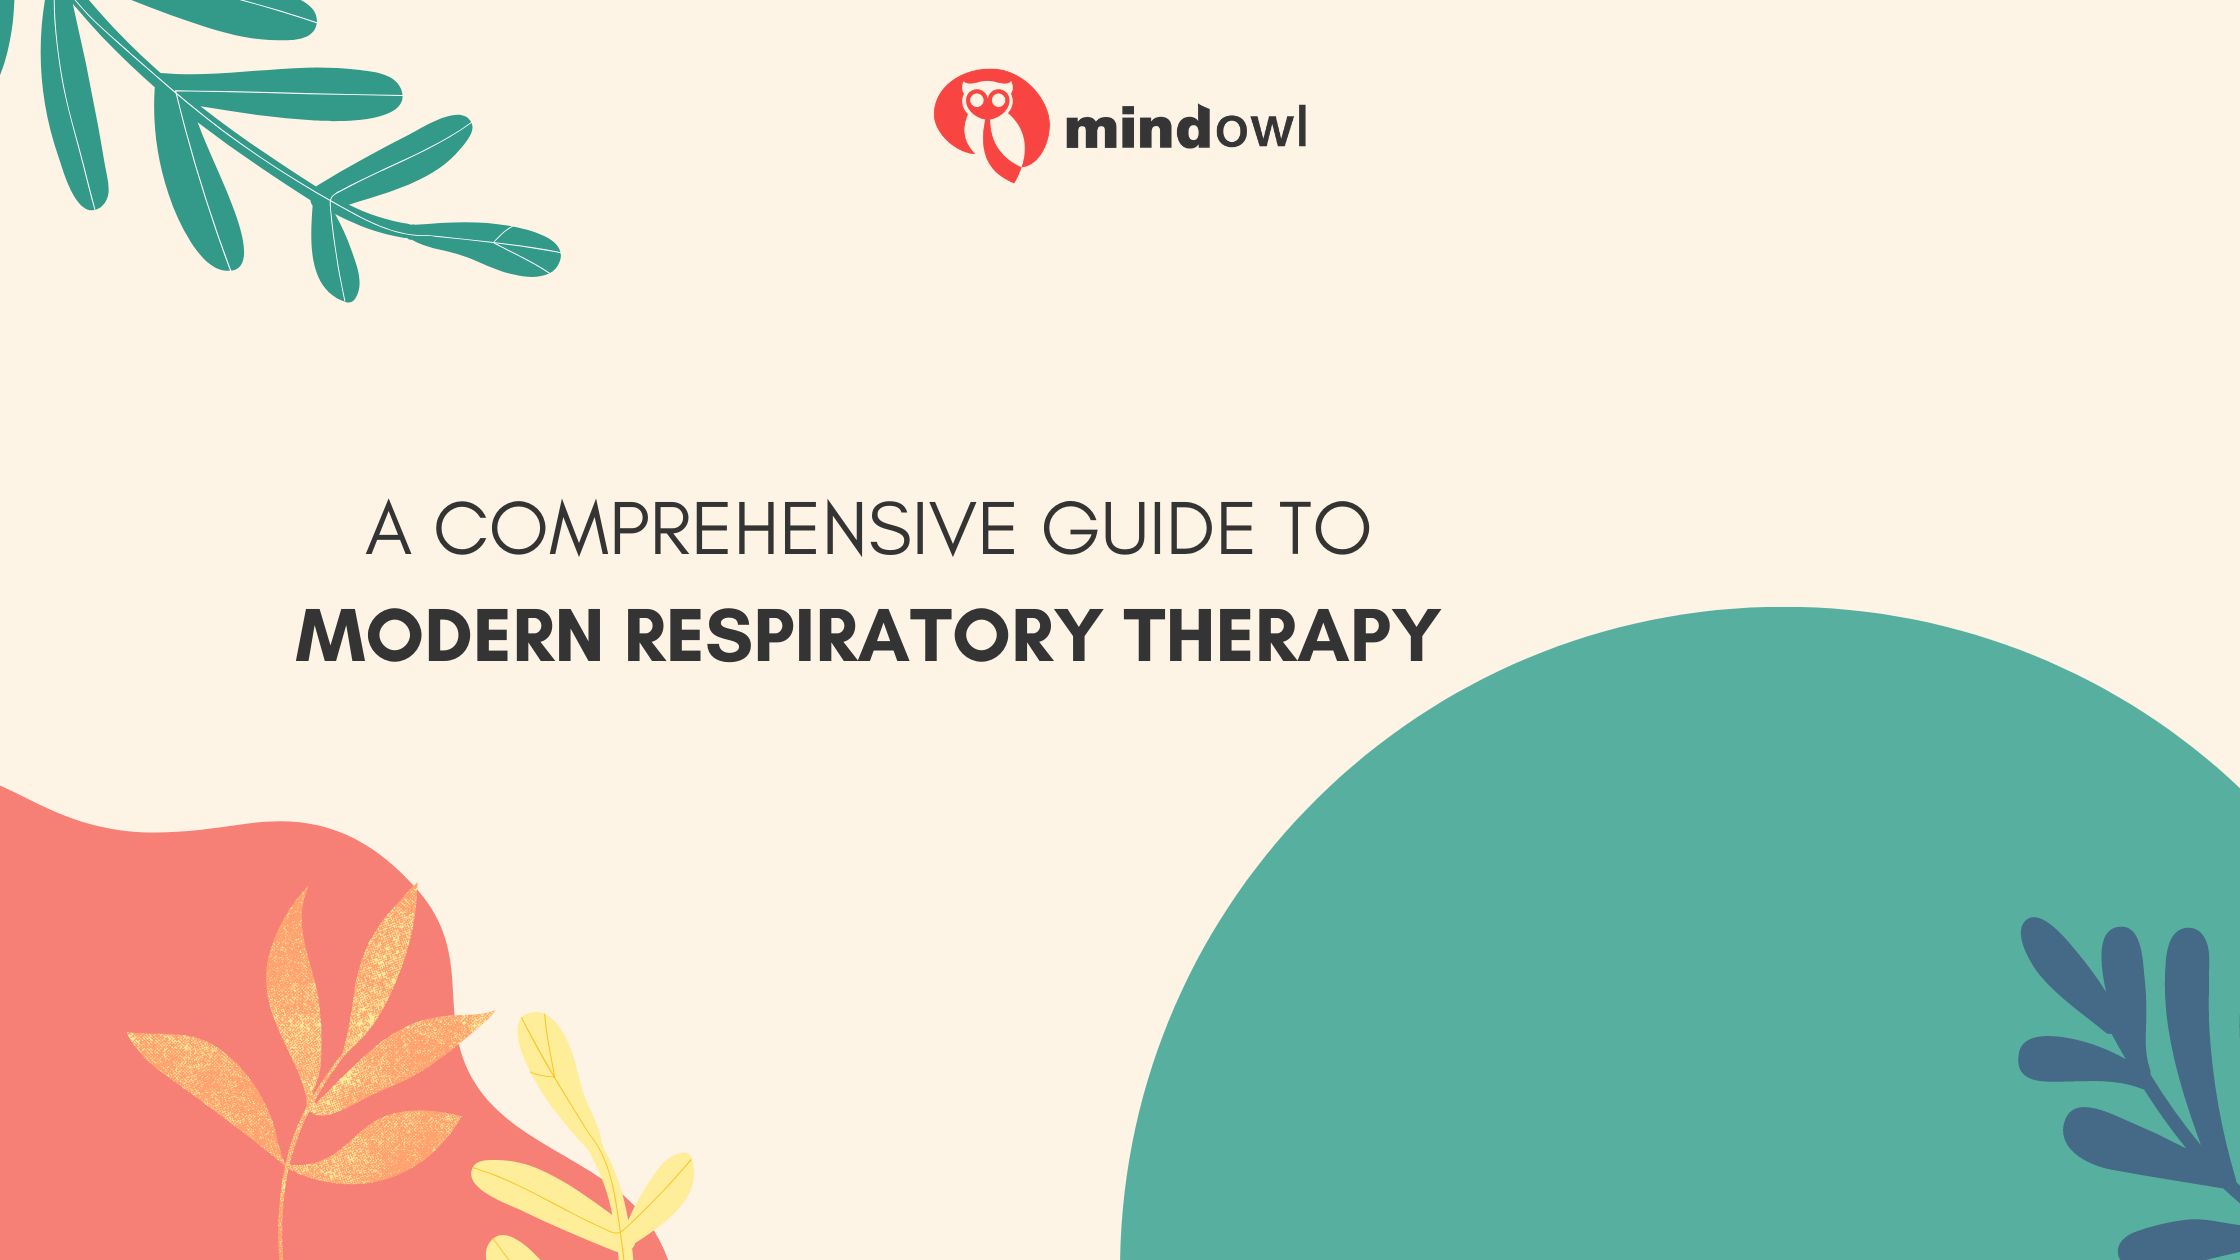 A Comprehensive Guide to Modern Respiratory Therapy